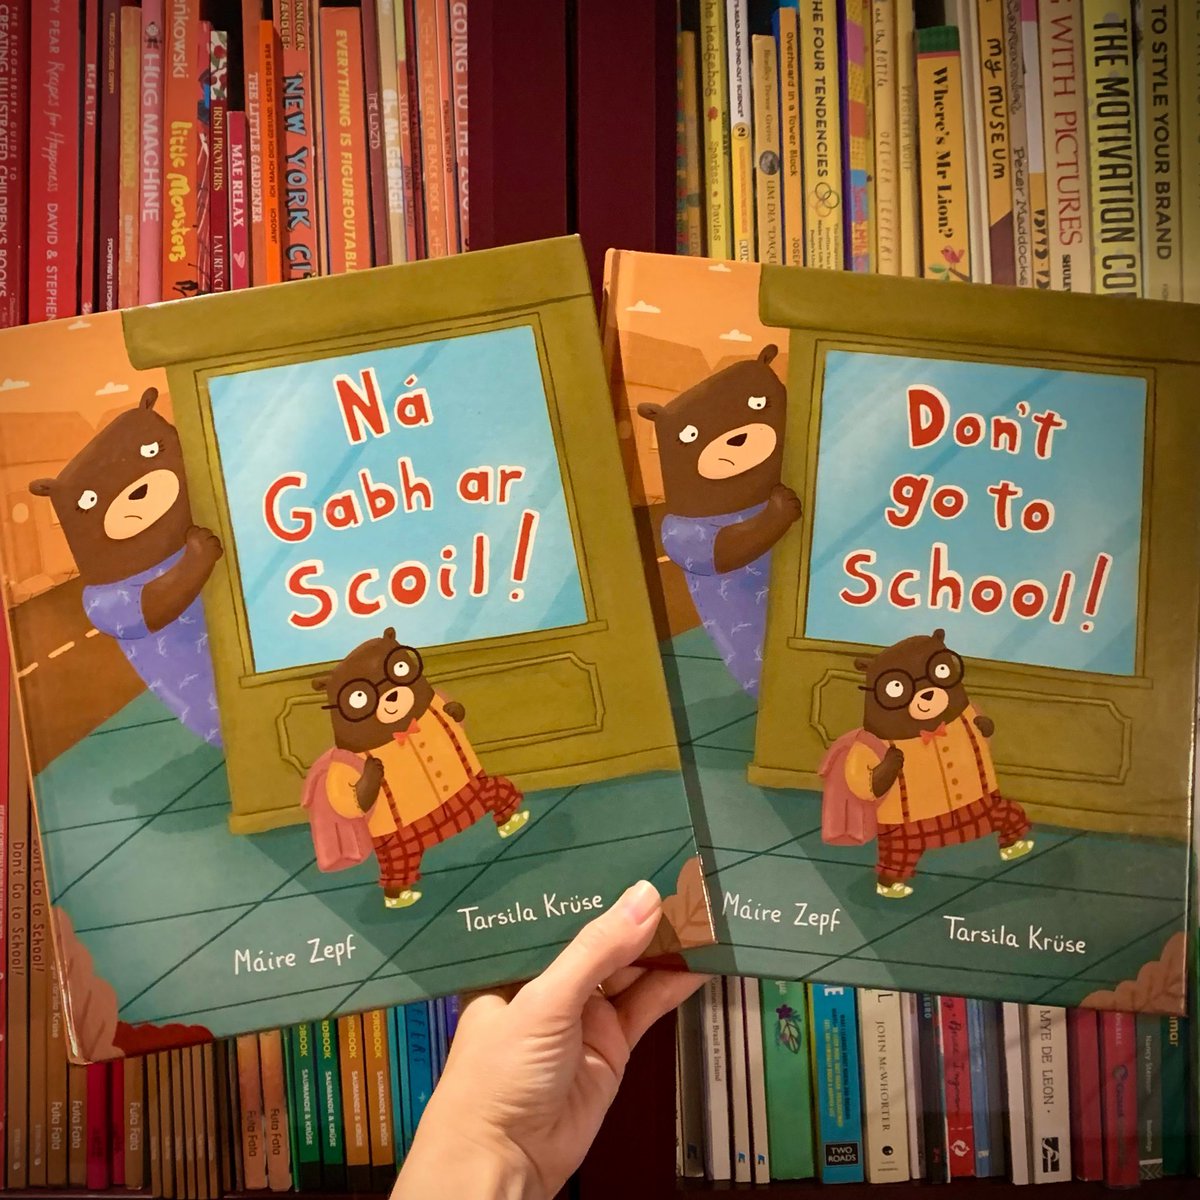 🎉 Ná Gabh ar Scoil! turns 6! Illustrated by me, written by Máire Zepf & published by Futa Fata and translated into 6 different languages (how fitting!), it is perfect for young readers who will start crèche / school and a funny and sweet bedtime story. #BuyIrish #LeabharGaeilge